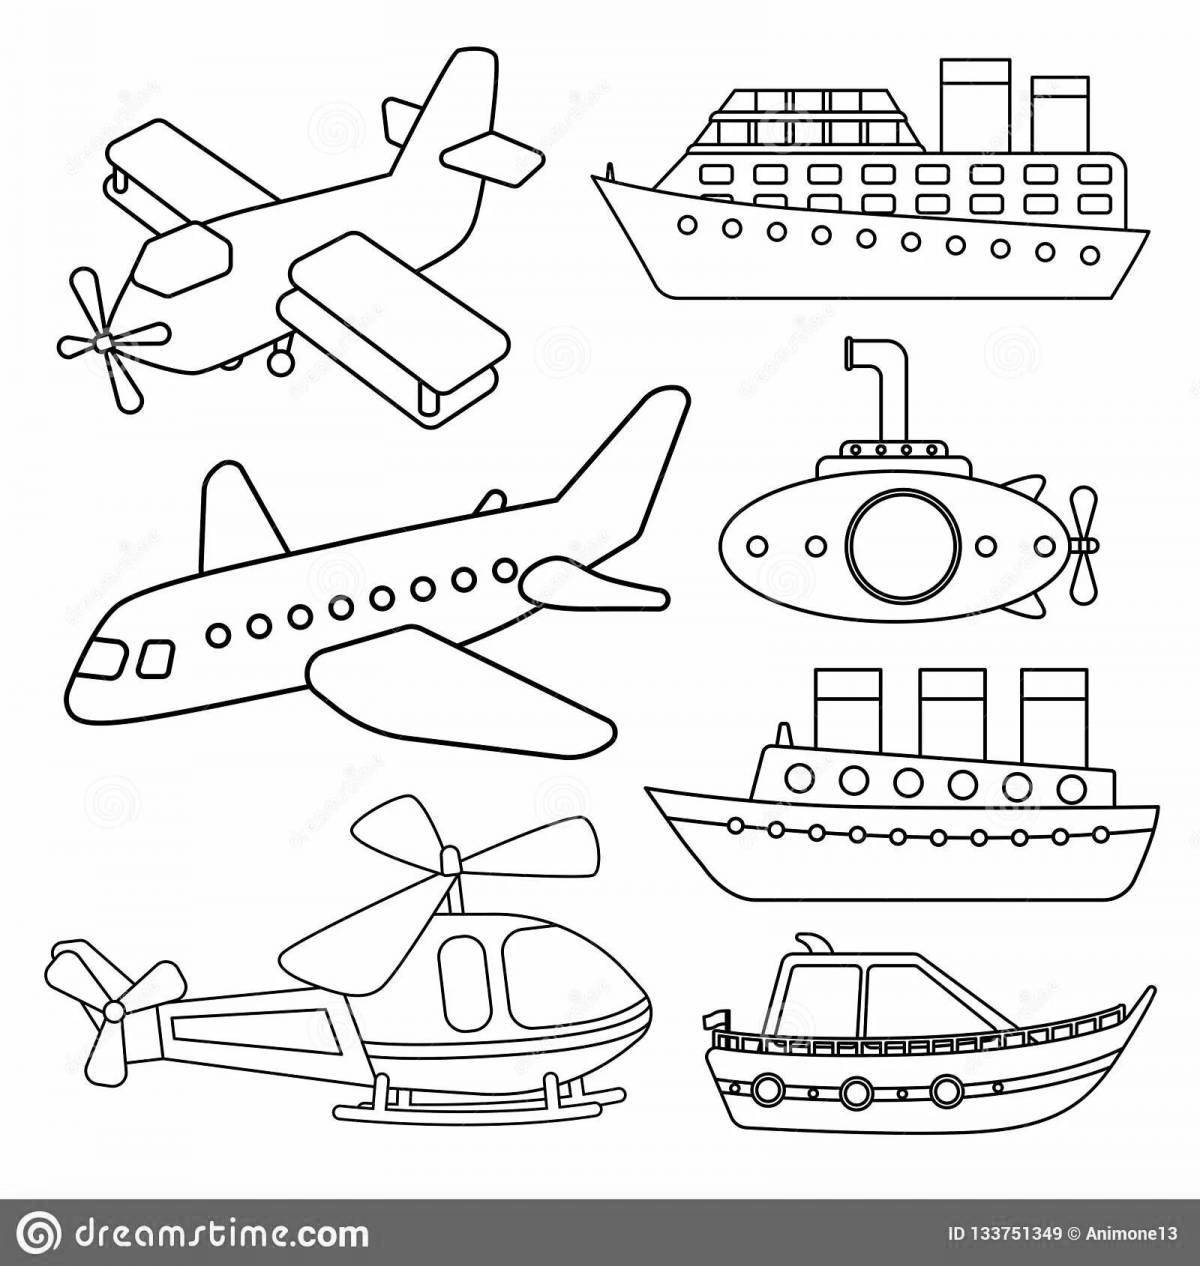 Awesome ground transportation coloring page